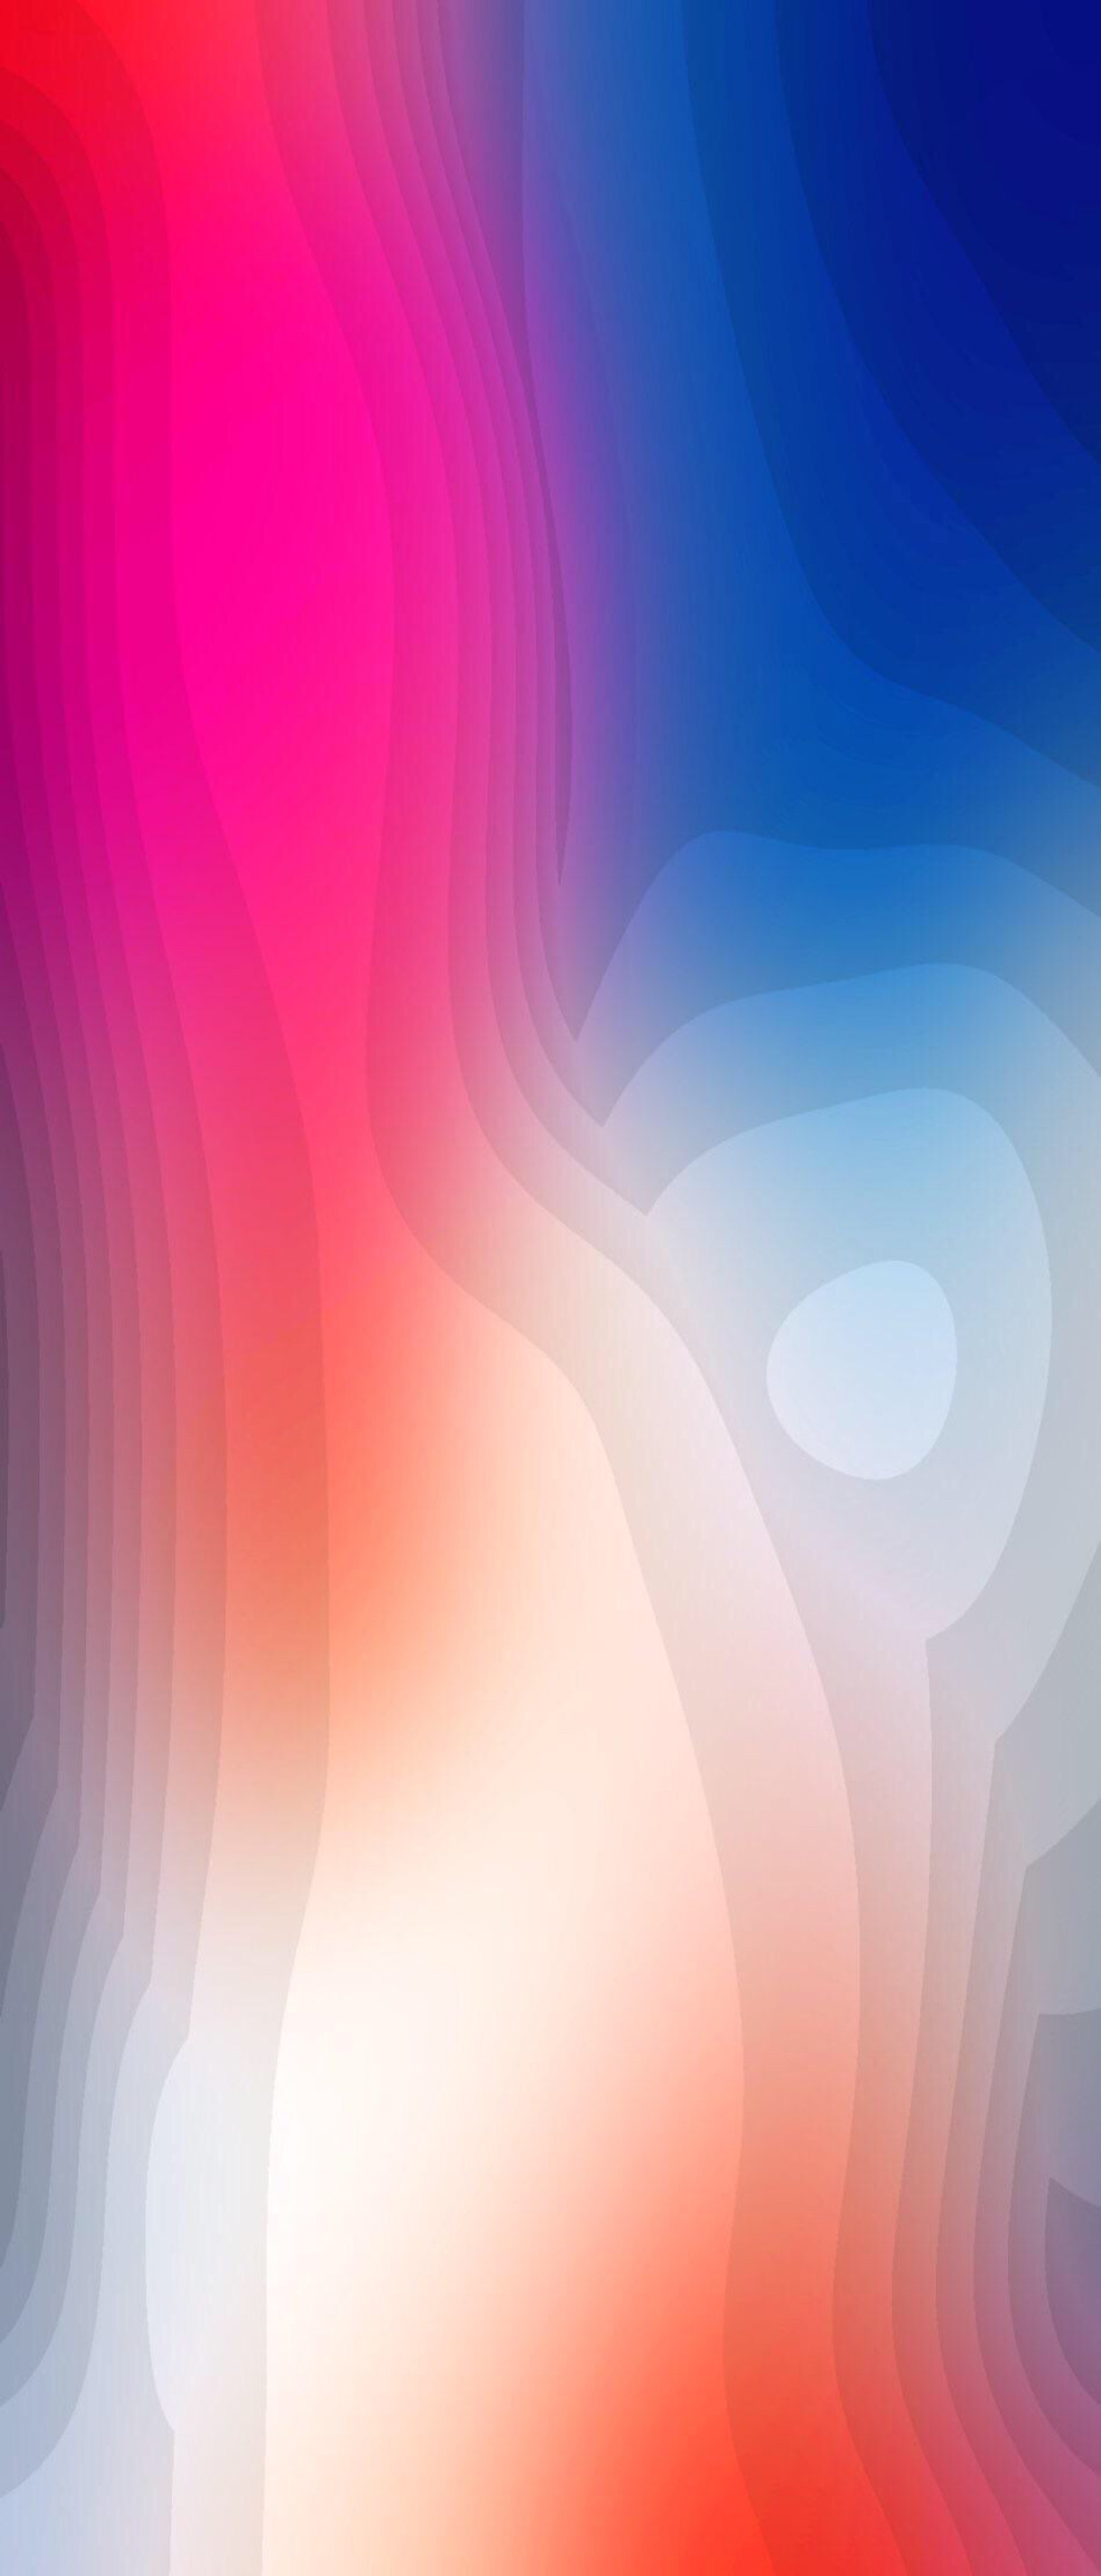 1242x2906 blue, pink, violet, wallpaper, pattern, galaxy, colour, abstract,